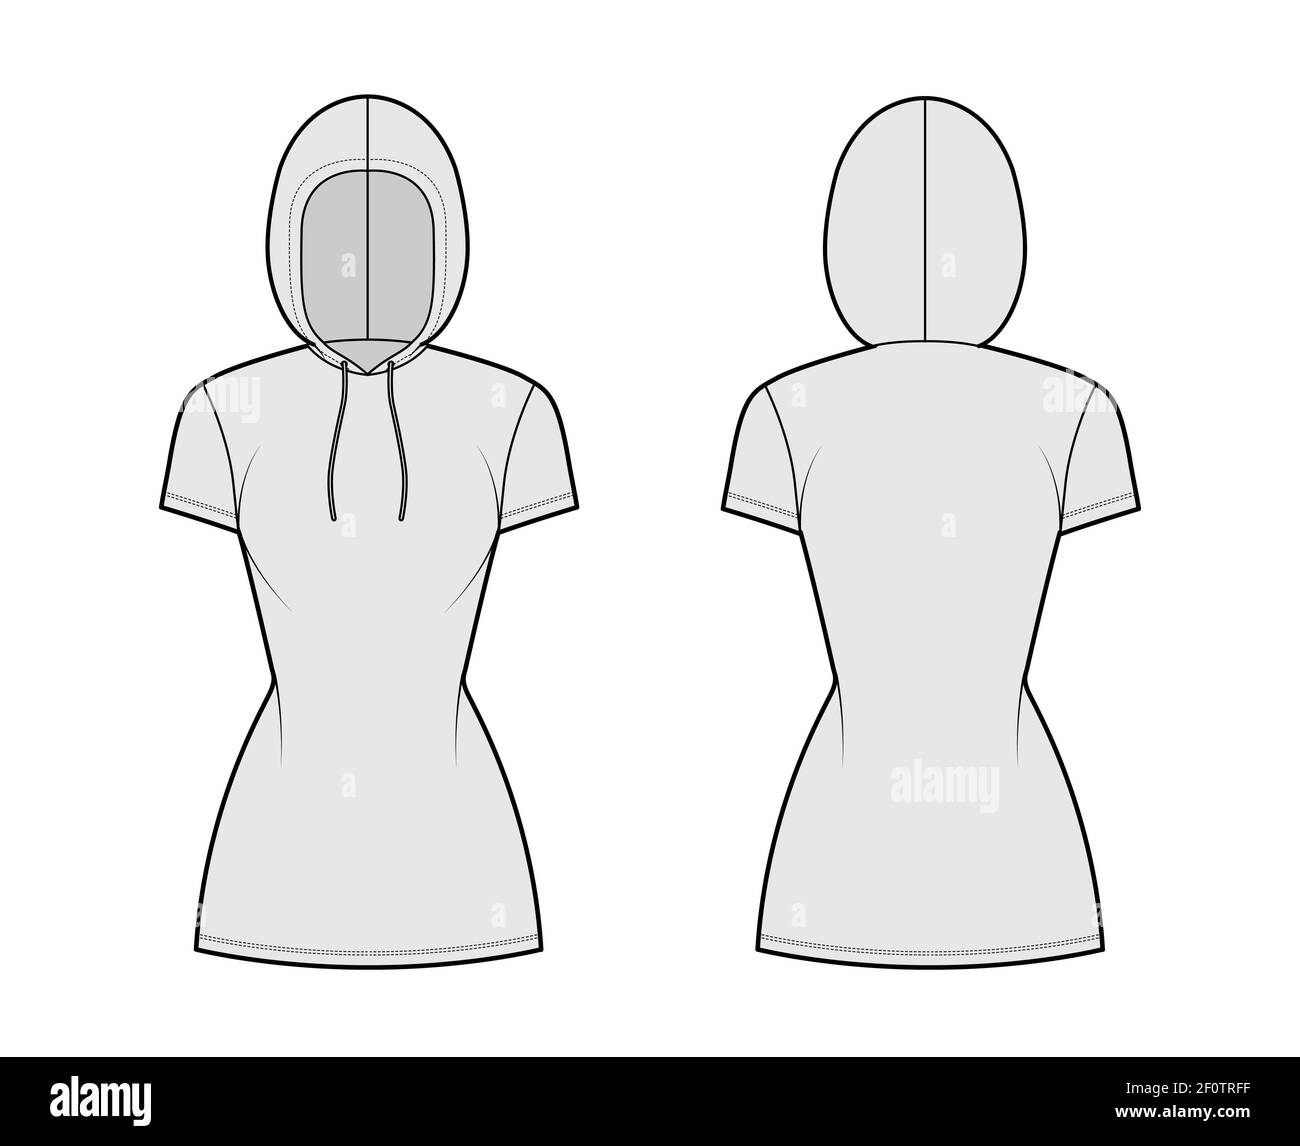 Hoody dress technical fashion illustration with short sleeves, mini length, fitted body, Pencil fullness. Flat sweater apparel template front, back, grey color style. Women, men, unisex CAD mockup Stock Vector